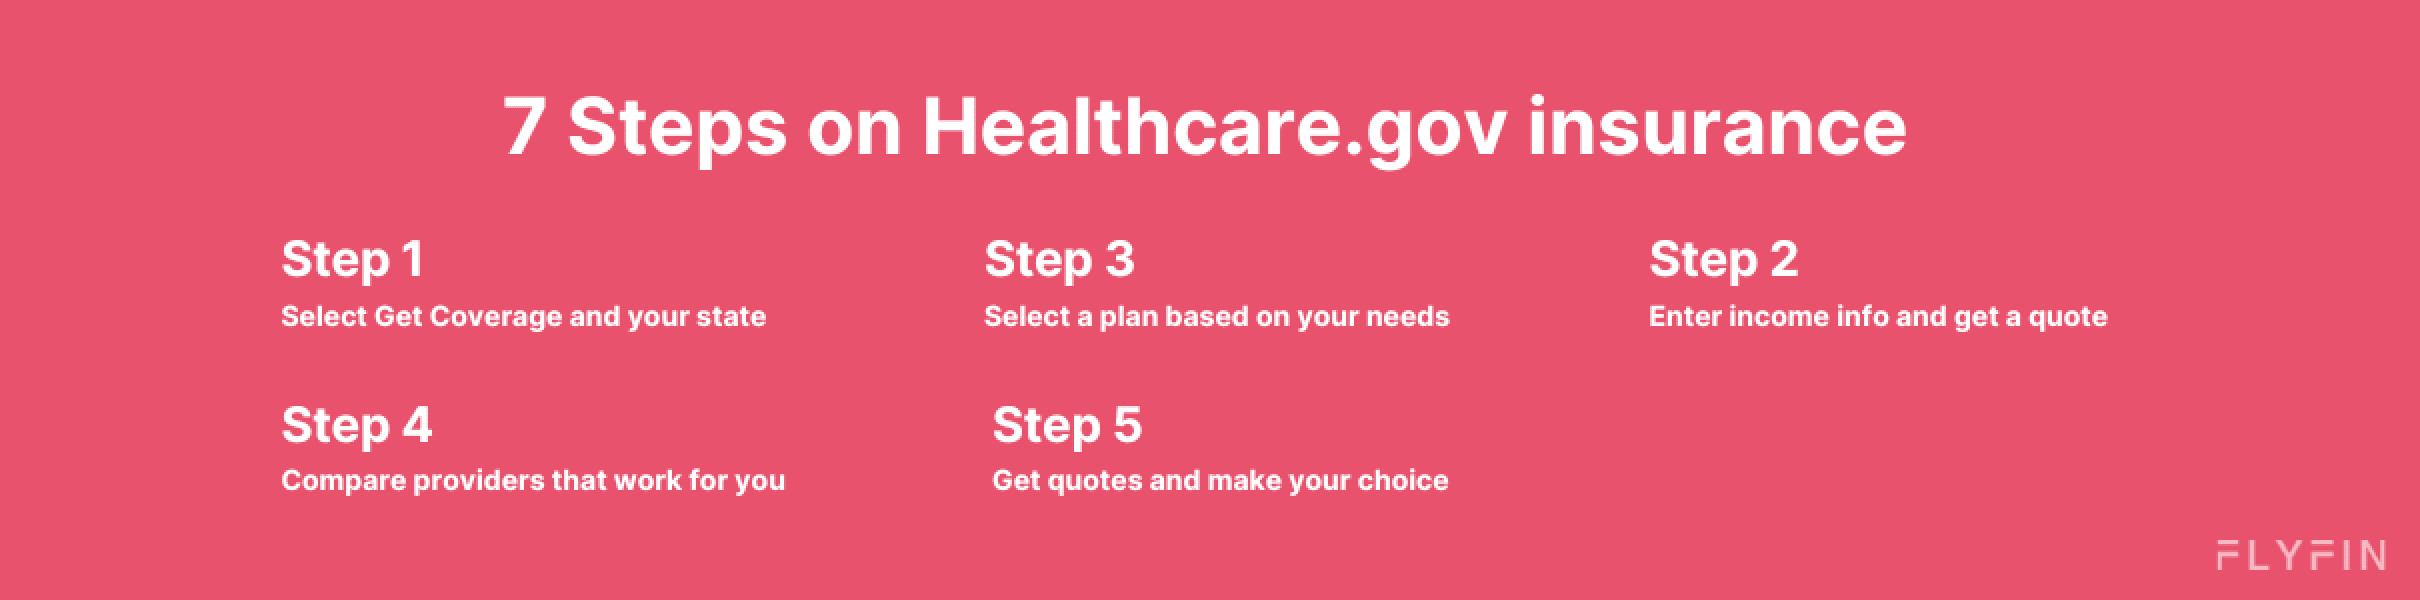 Image outlining 7 steps to get healthcare insurance on Healthcare.gov. Includes selecting state, comparing providers, choosing a plan, getting quotes, and entering income info.